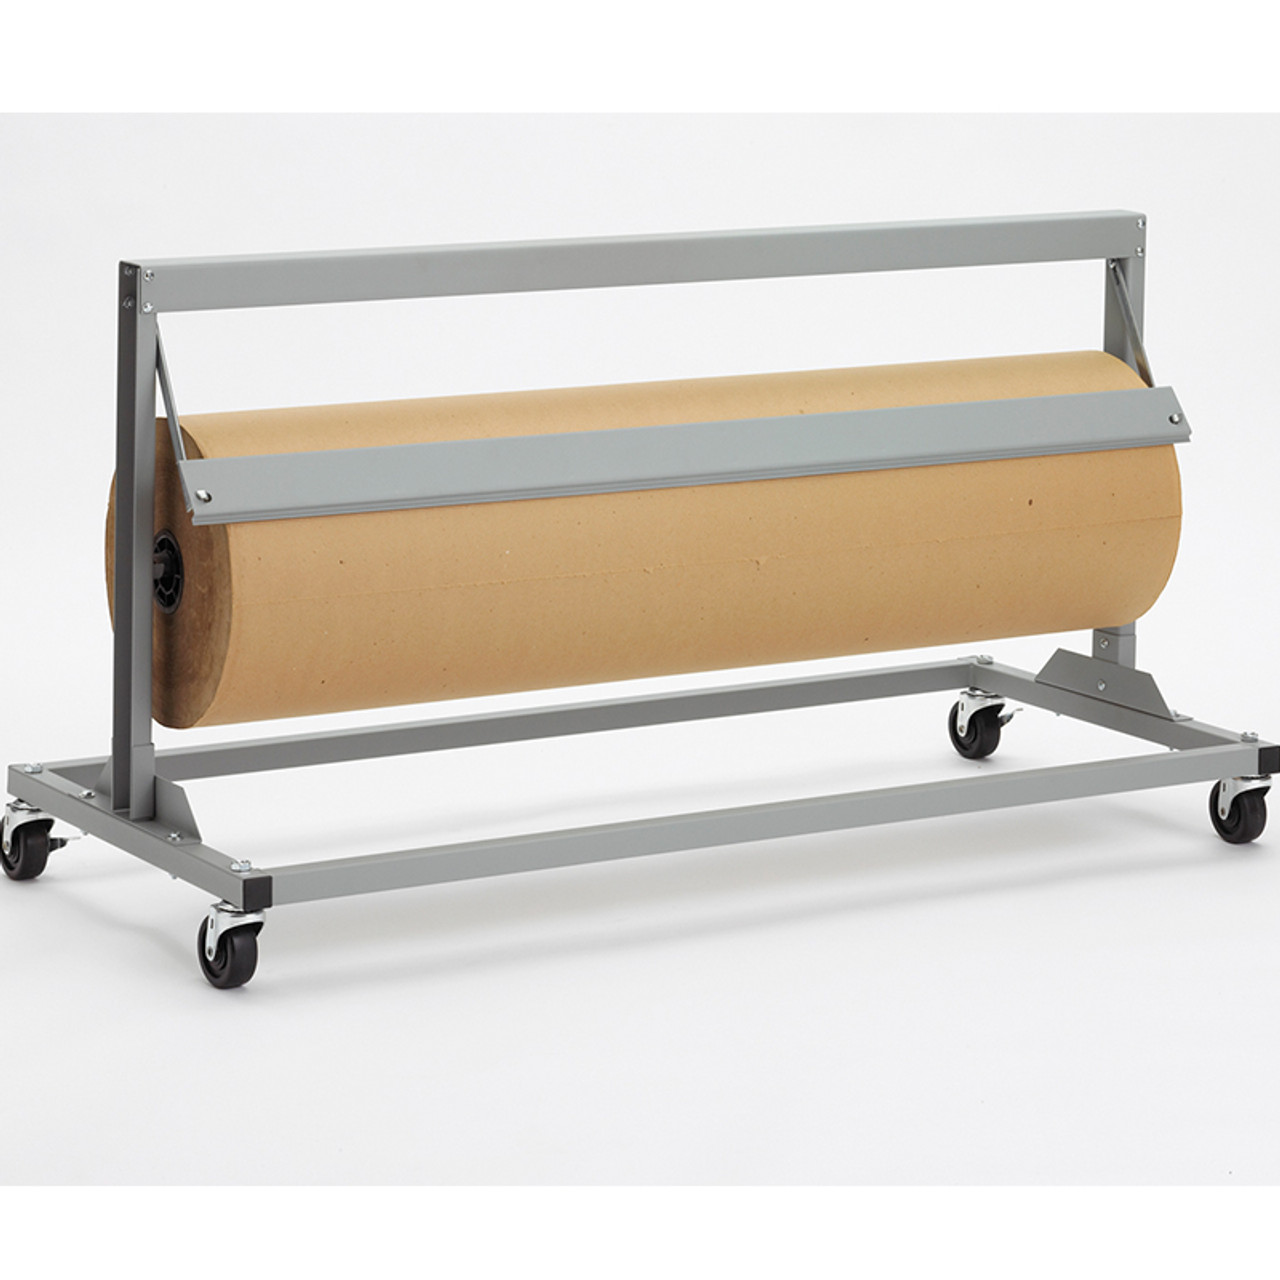 36 Jumbo Paper Dispenser Cutter Straight Edge with Casters